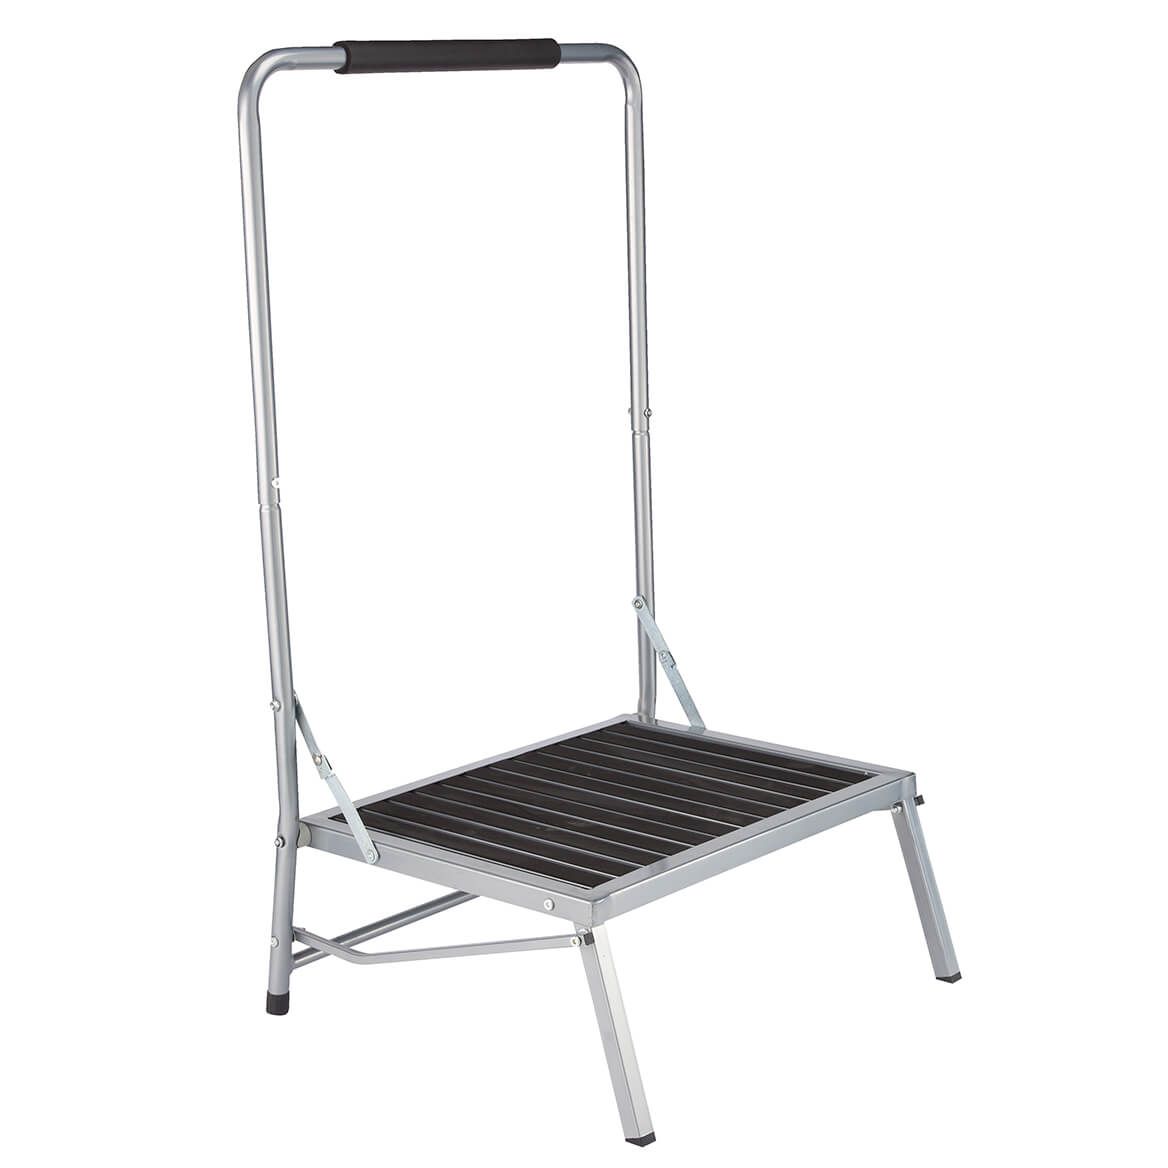 Extra Wide Folding Step Stool with Handle                 XL + '-' + 344953